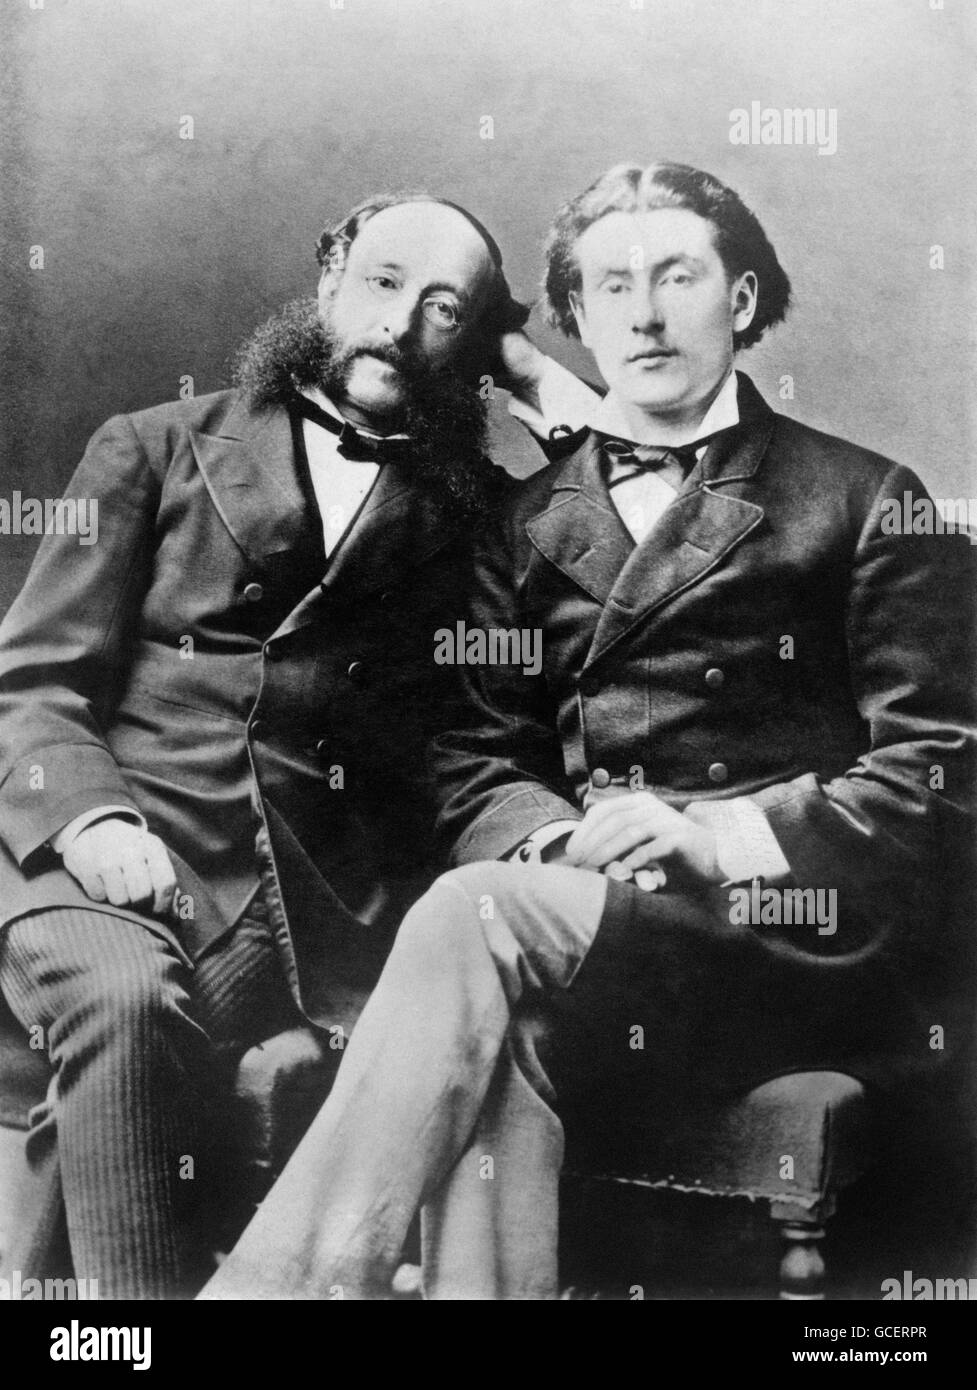 Baron Paul Julius de Reuter and his son Herbert de Reuter, journalist and media owner, and the founder of the Reuters news agency. Stock Photo